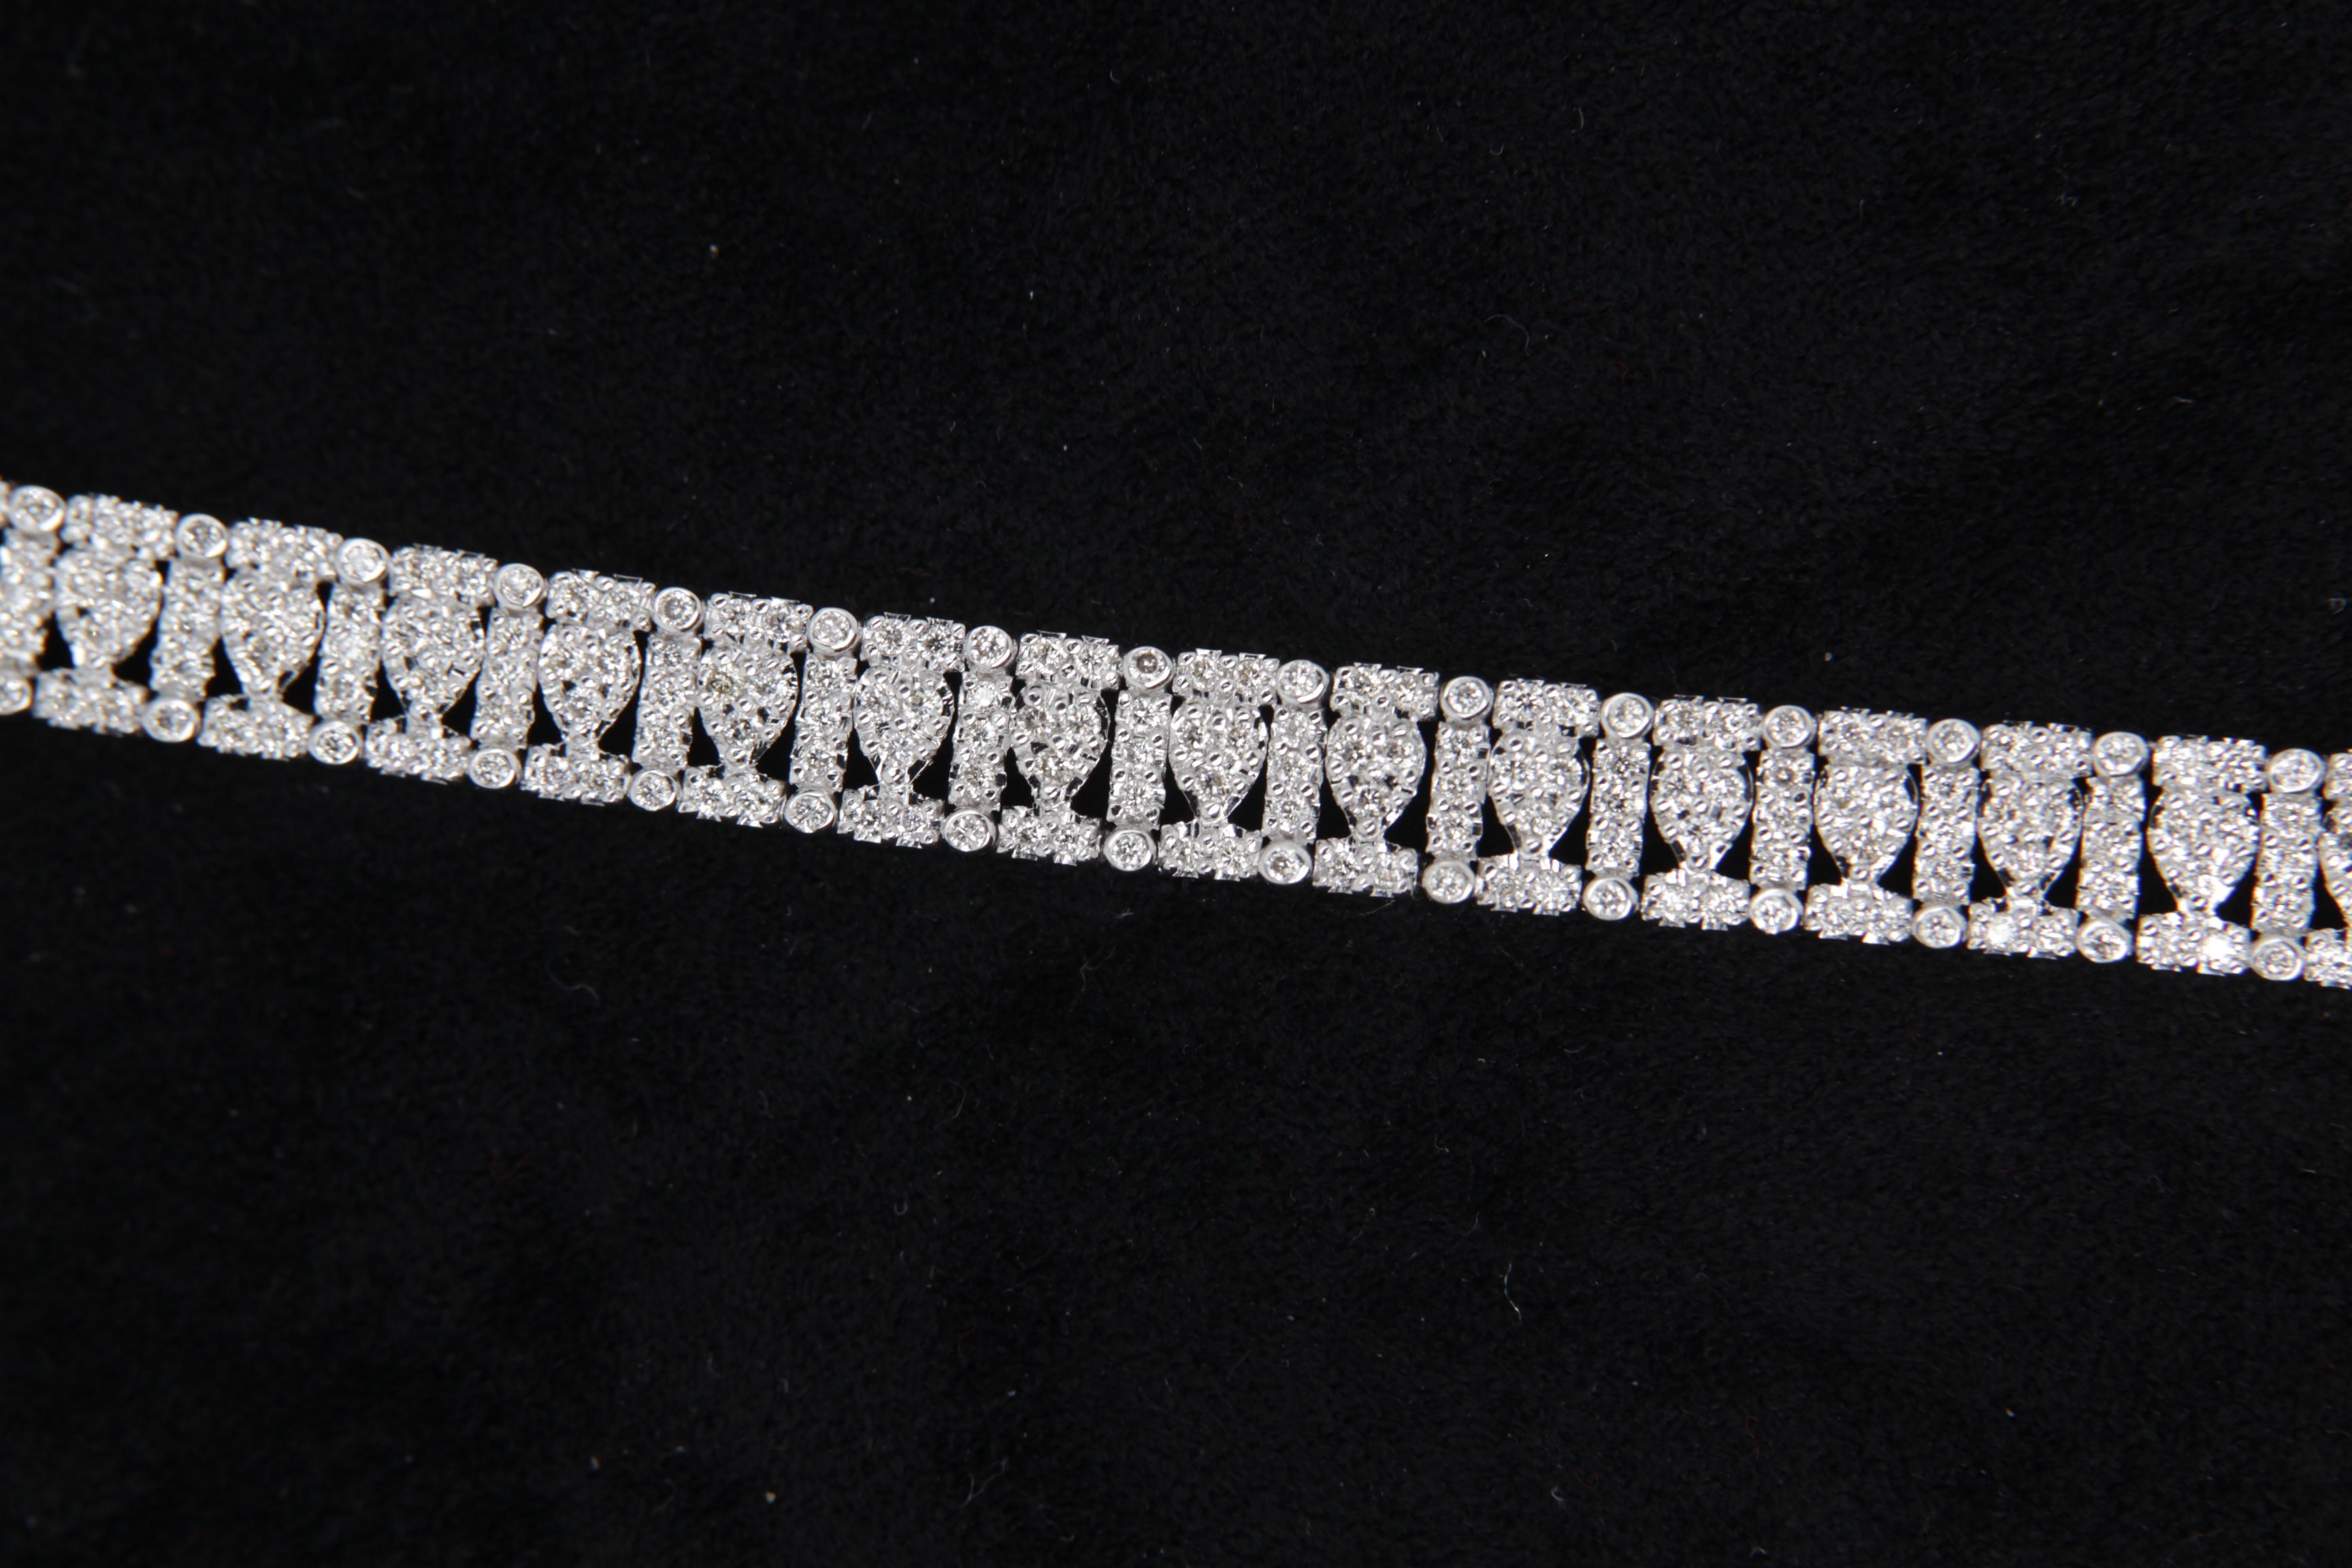 A brand new diamond bracelet in 18 karat gold. The total diamond weight is 2.90 carats and total bracelet weight is 21.72 grams.